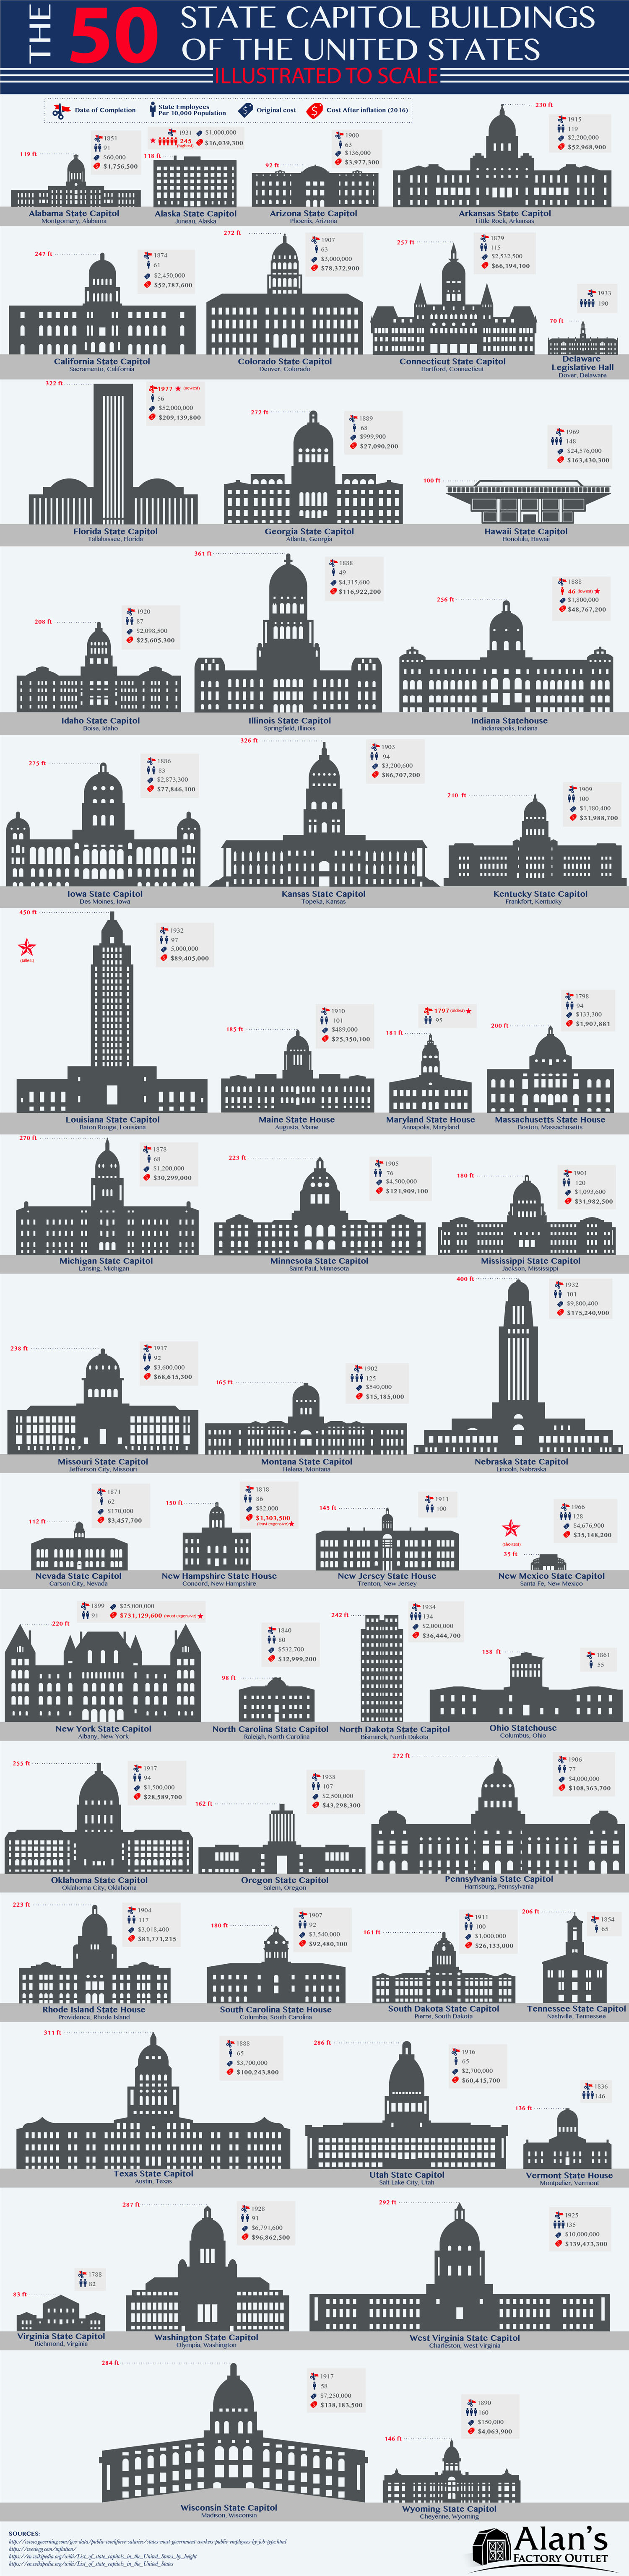 The 50 State Capitol Buildings of the U.S. Illustrated to Scale